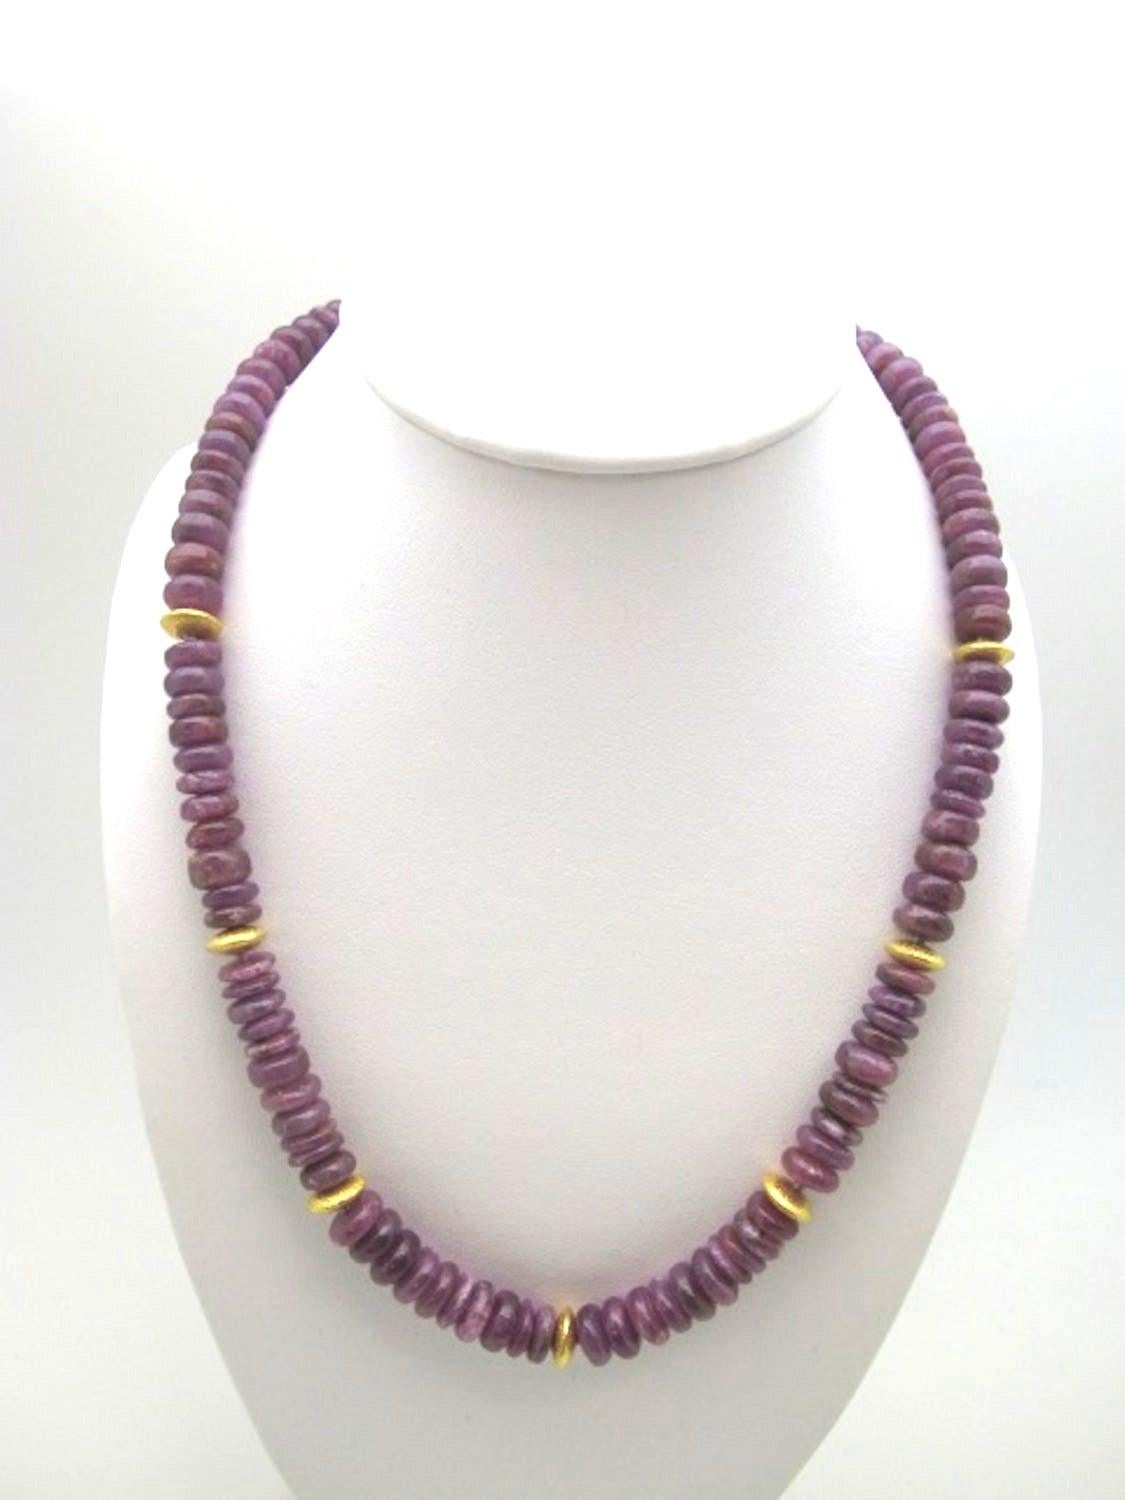 Artisan 290.44 Carat Total, Ruby Bead Necklace, Yellow Gold Accents